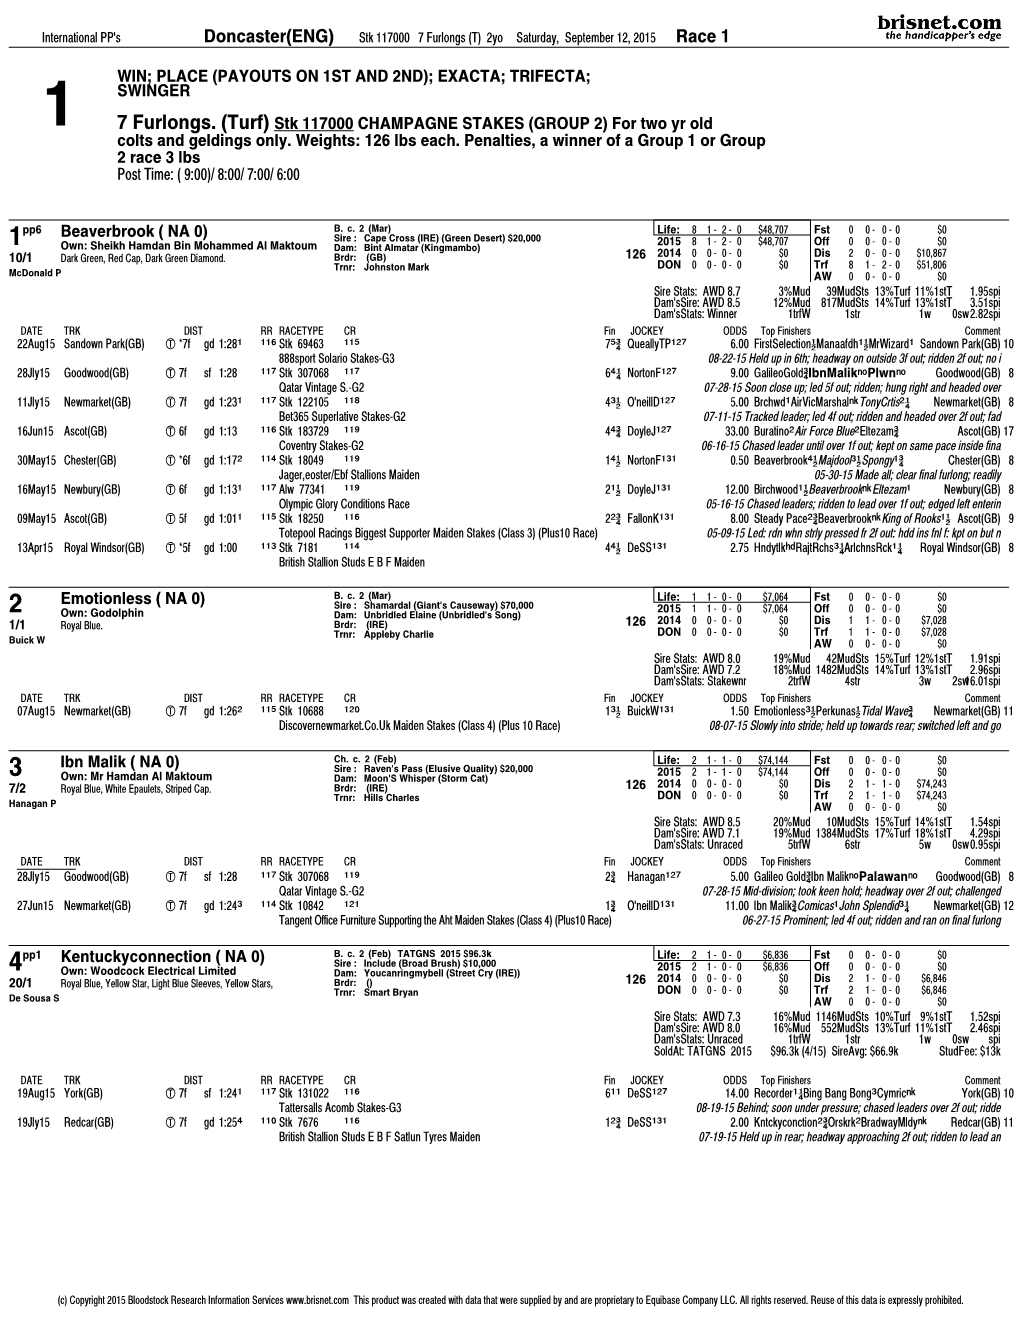 7 Furlongs. (Turf) Stk 117000 CHAMPAGNE STAKES (GROUP 2) for Two Yr Old Colts and Geldings Only